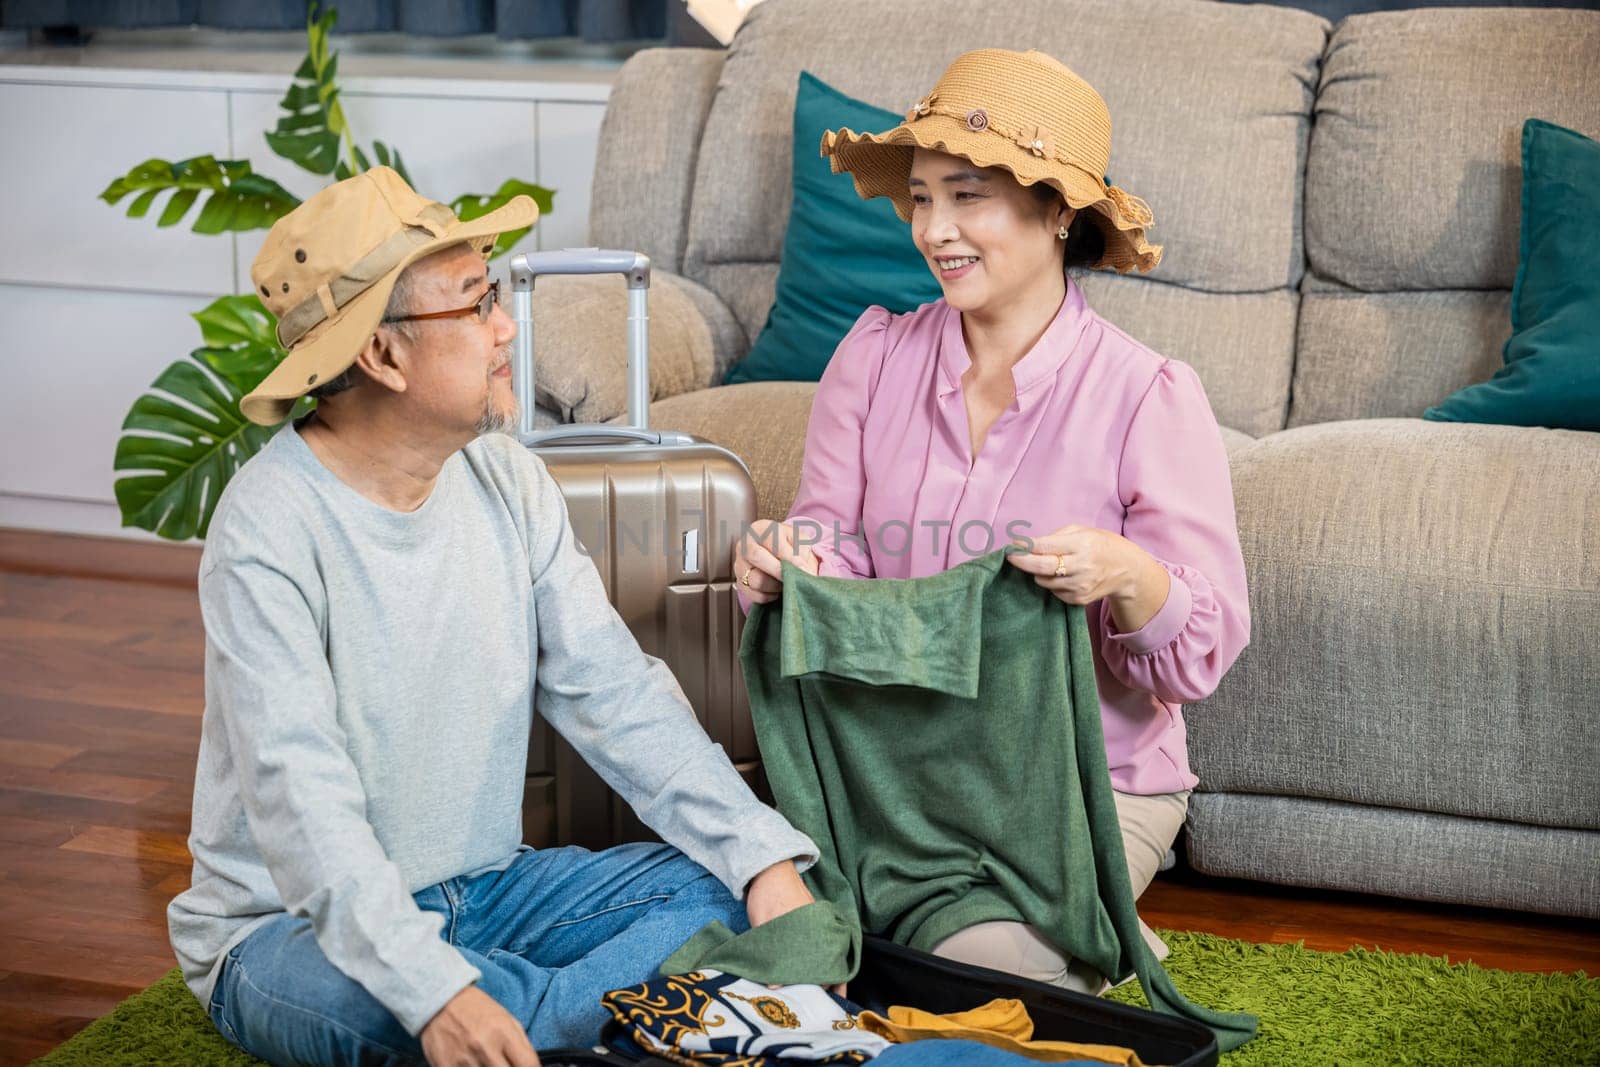 Asian couple old senior marry retired couple prepare luggage suitcase arranging for travel, Romantic retired packing clothes travel bag suitcase together on floor at home interior living room